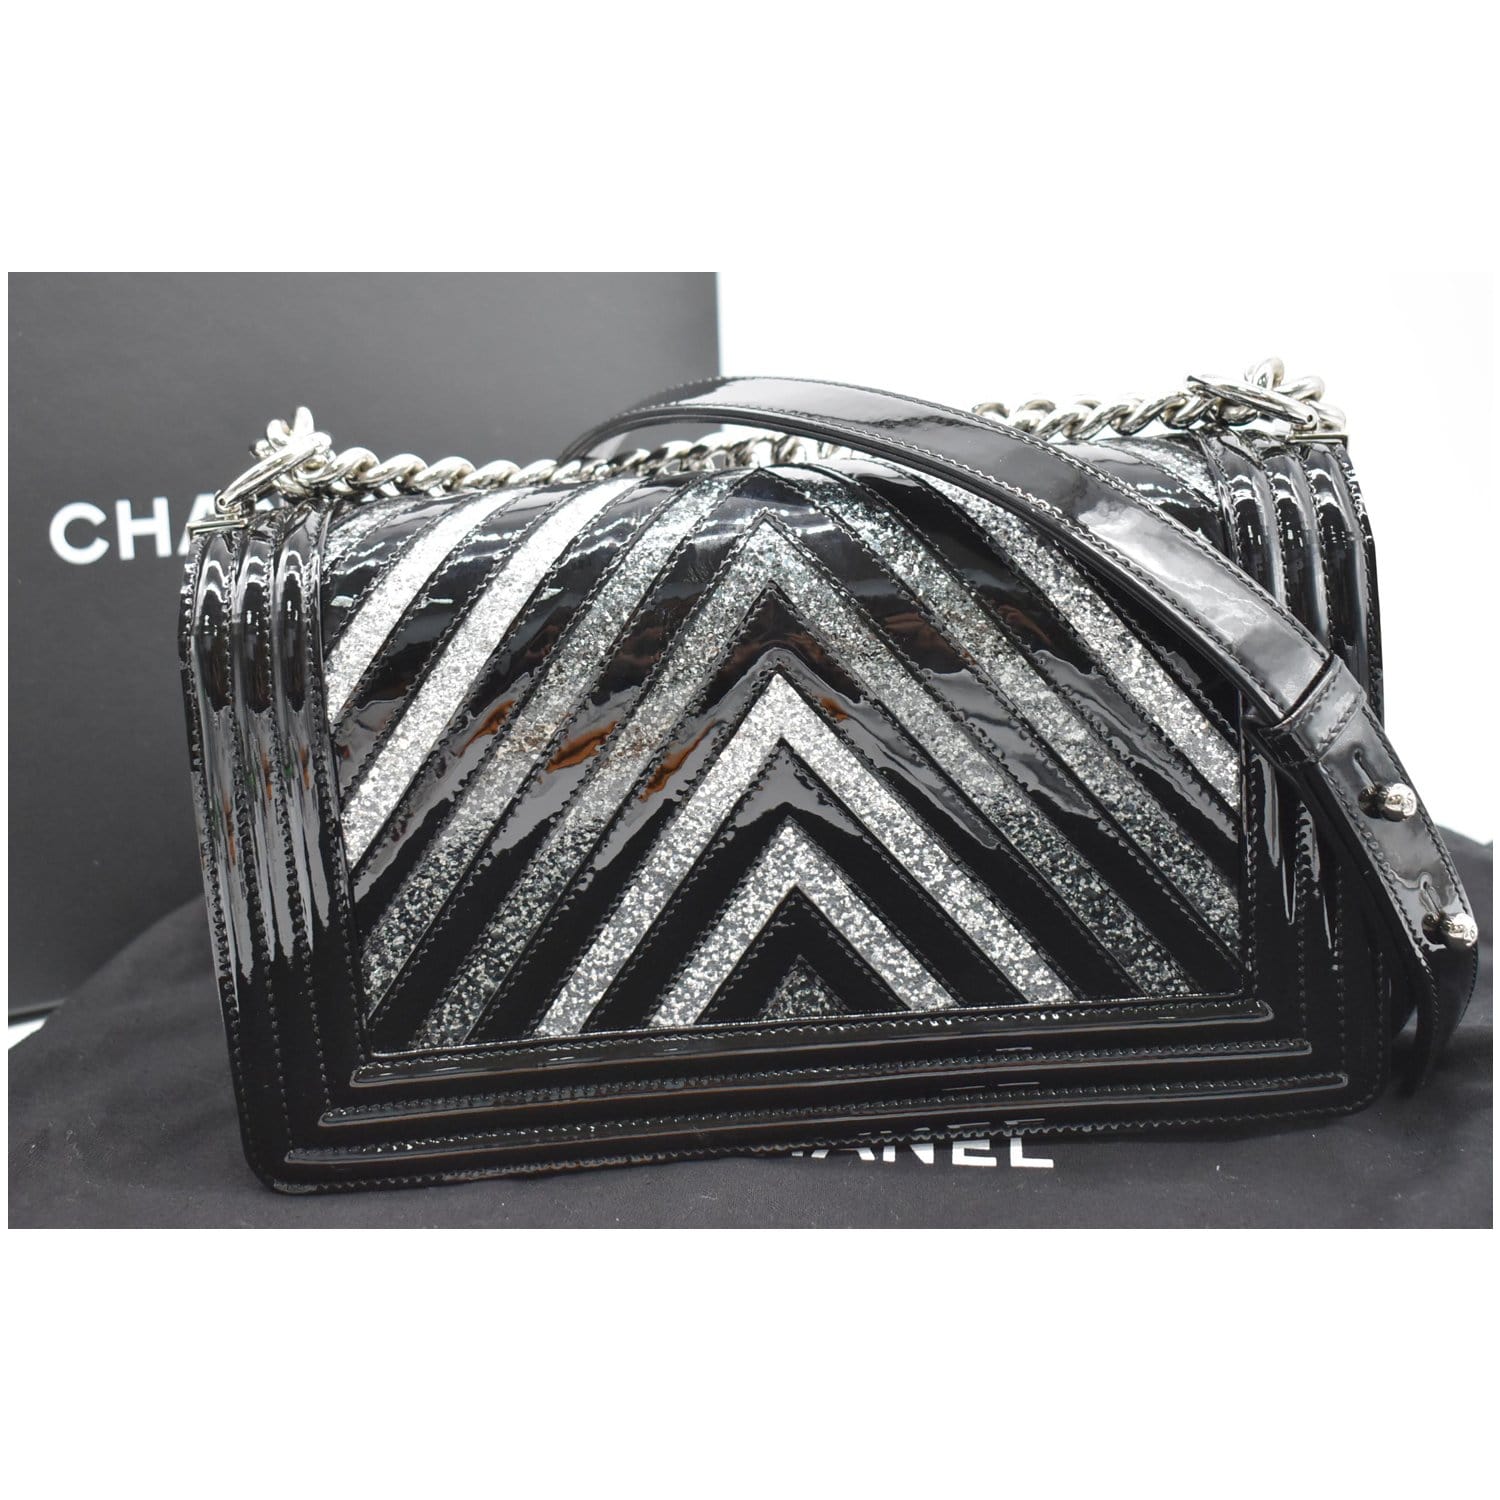 Chanel Medium Quilted Crystal Tweed Single Flap Bag Auction